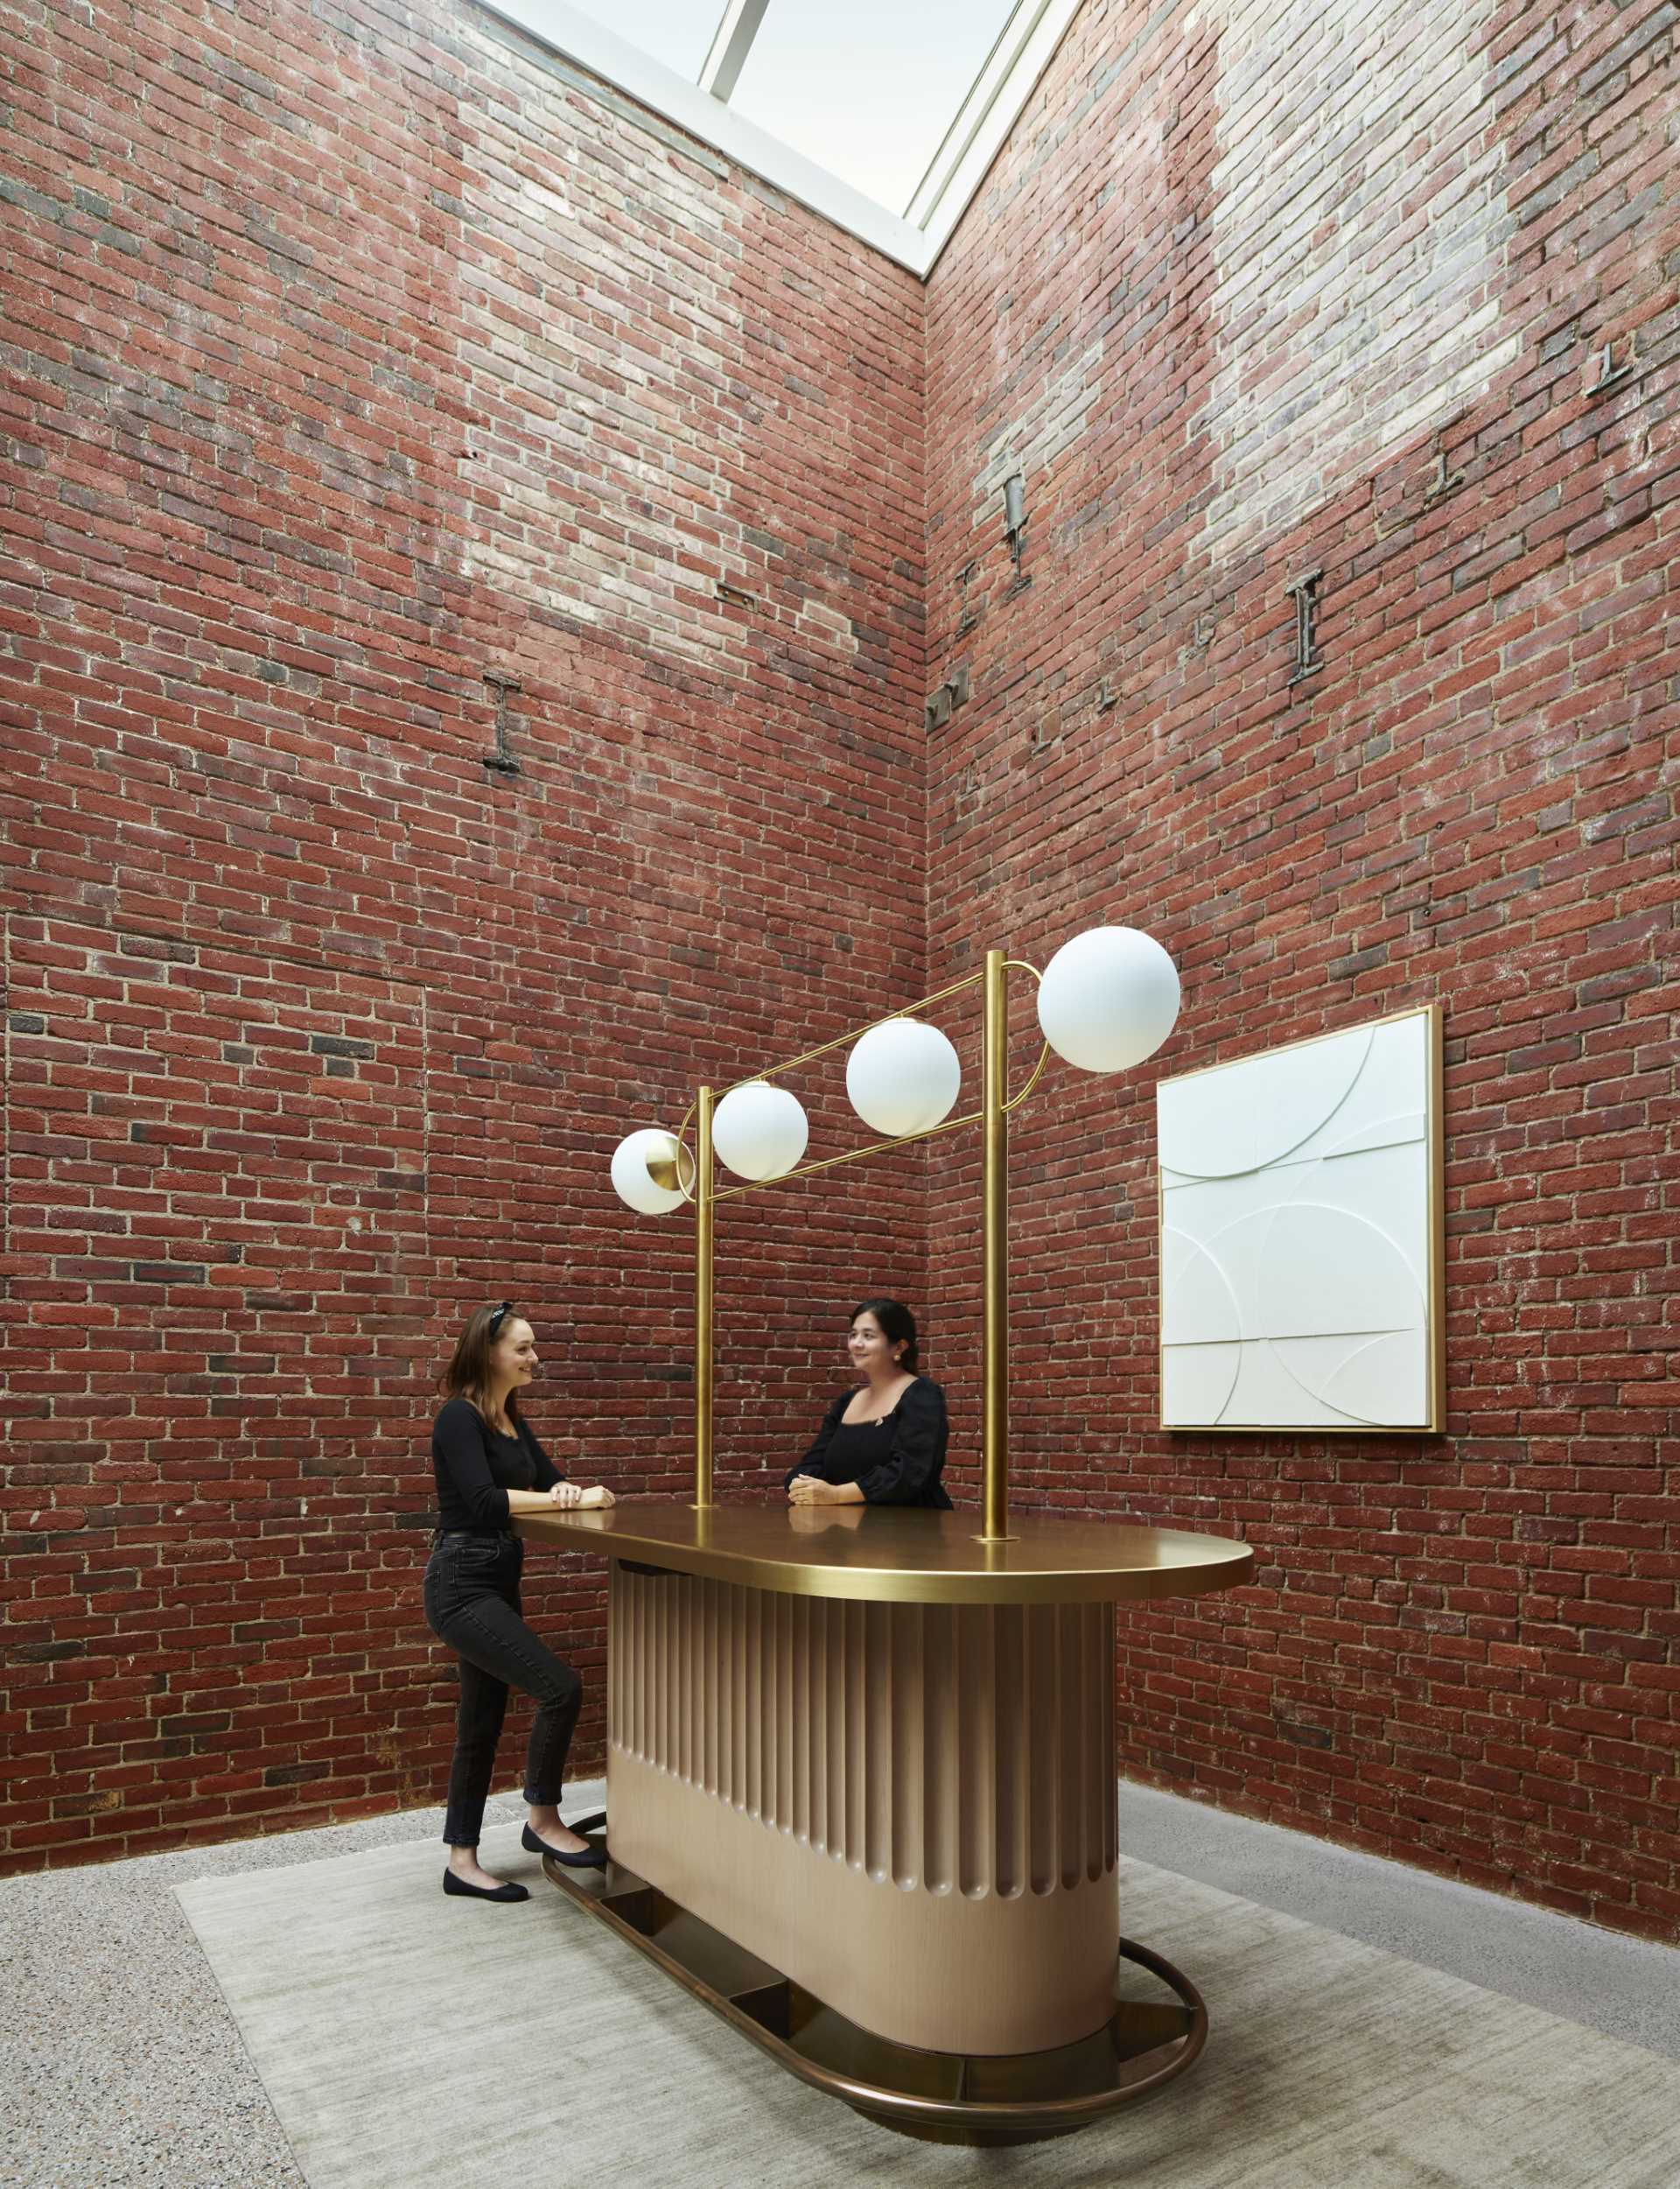 A contemporary lobby in an office building with original brick walls.